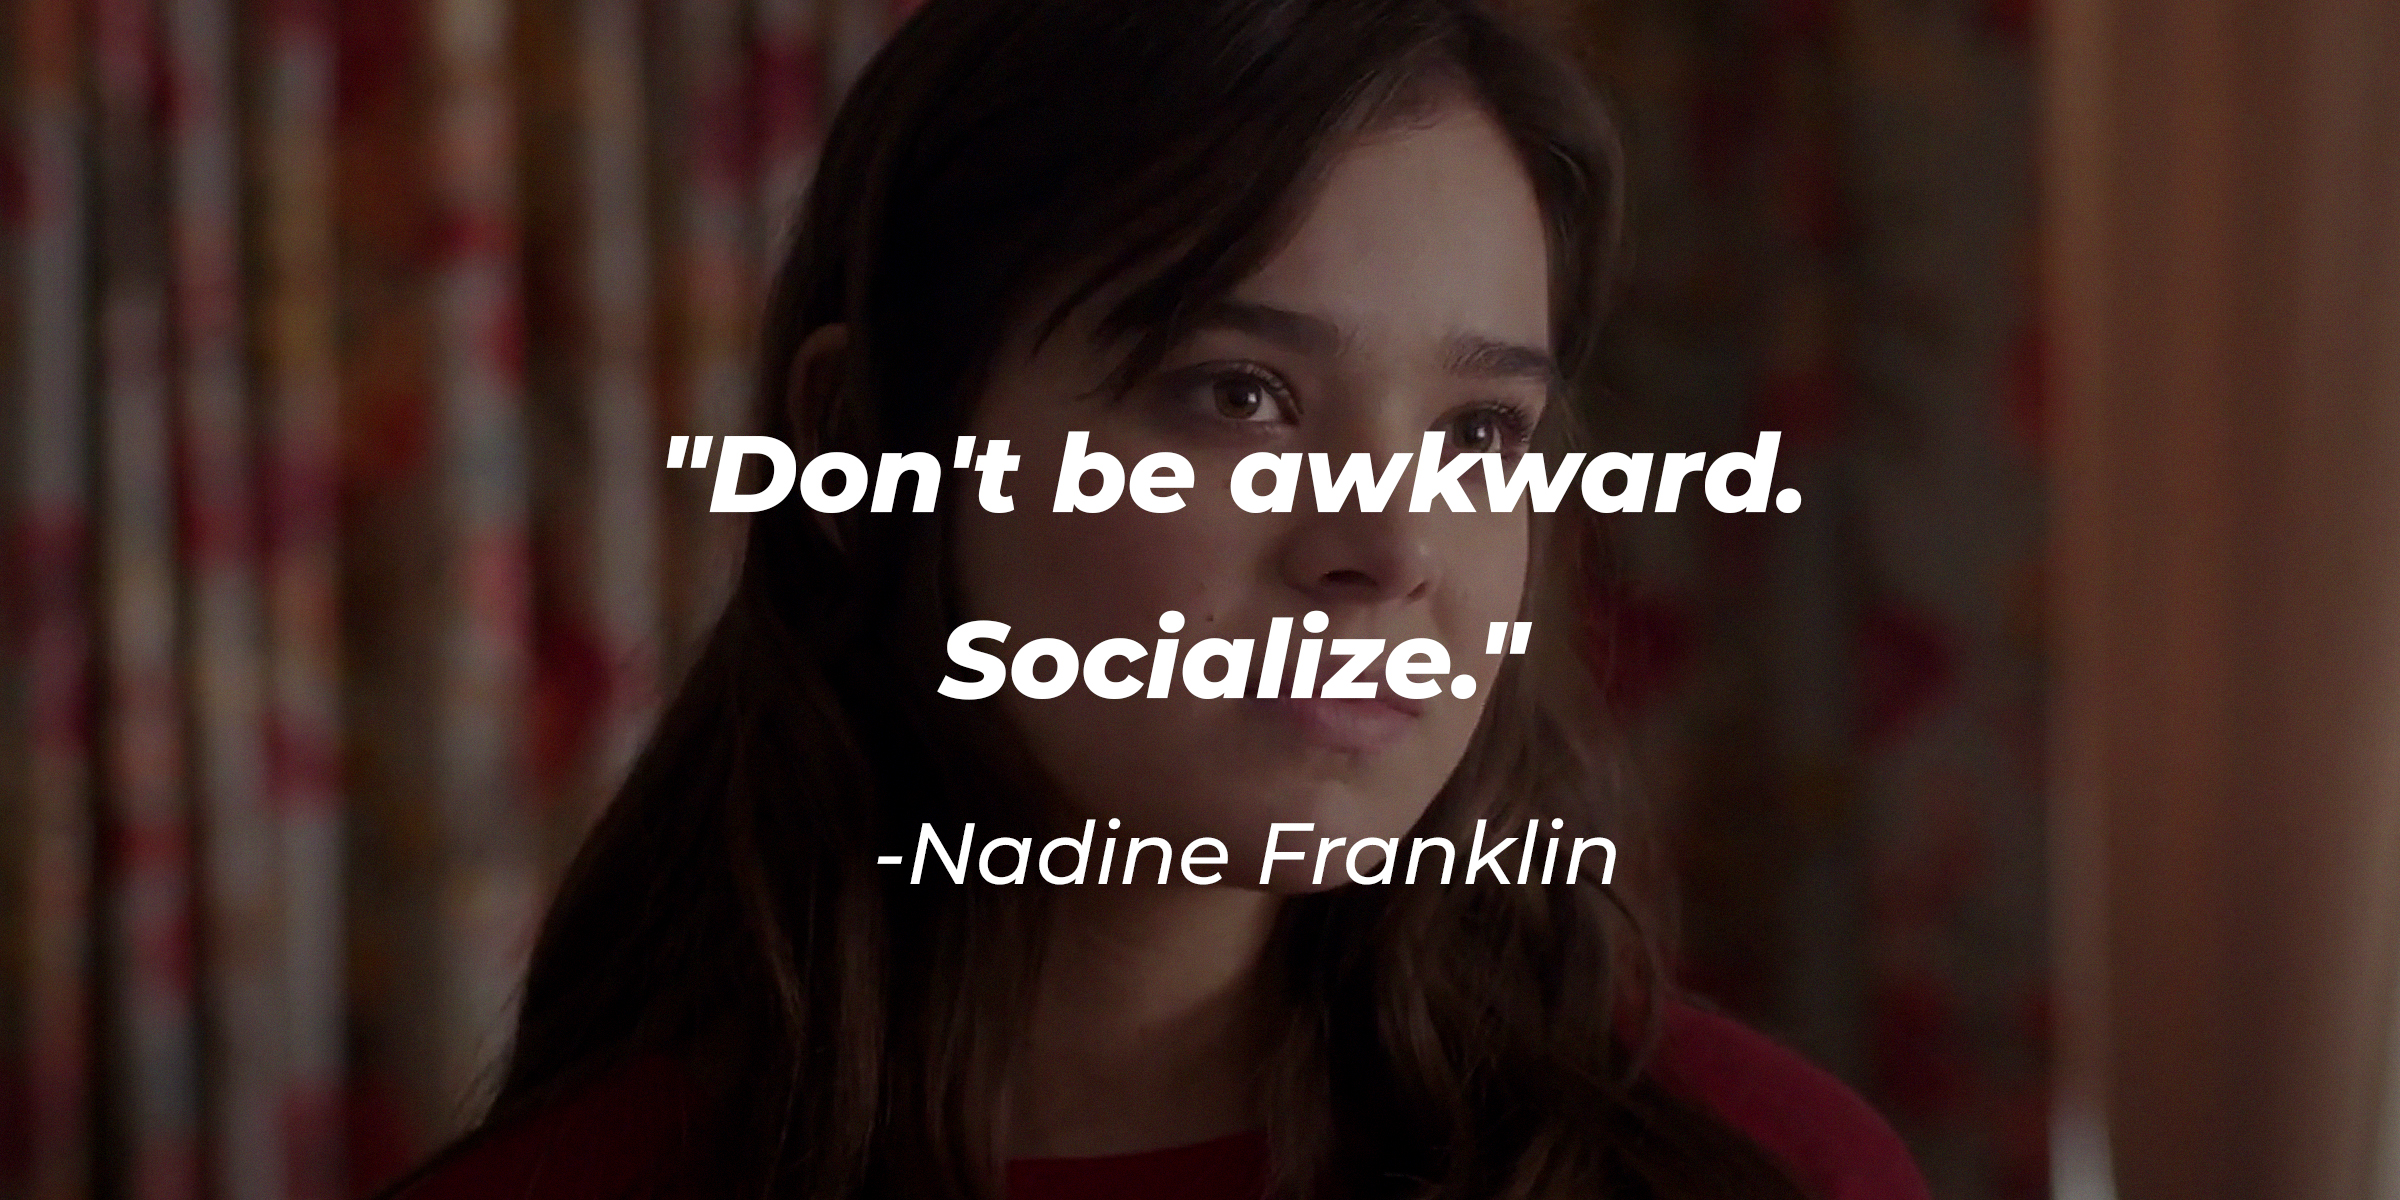 A photo of Nadine Franklin in "The Edge of Seventeen" with the quote: "Don't be awkward. Socialize." | Source: youtube.com/UniversalPicturesAllAccess